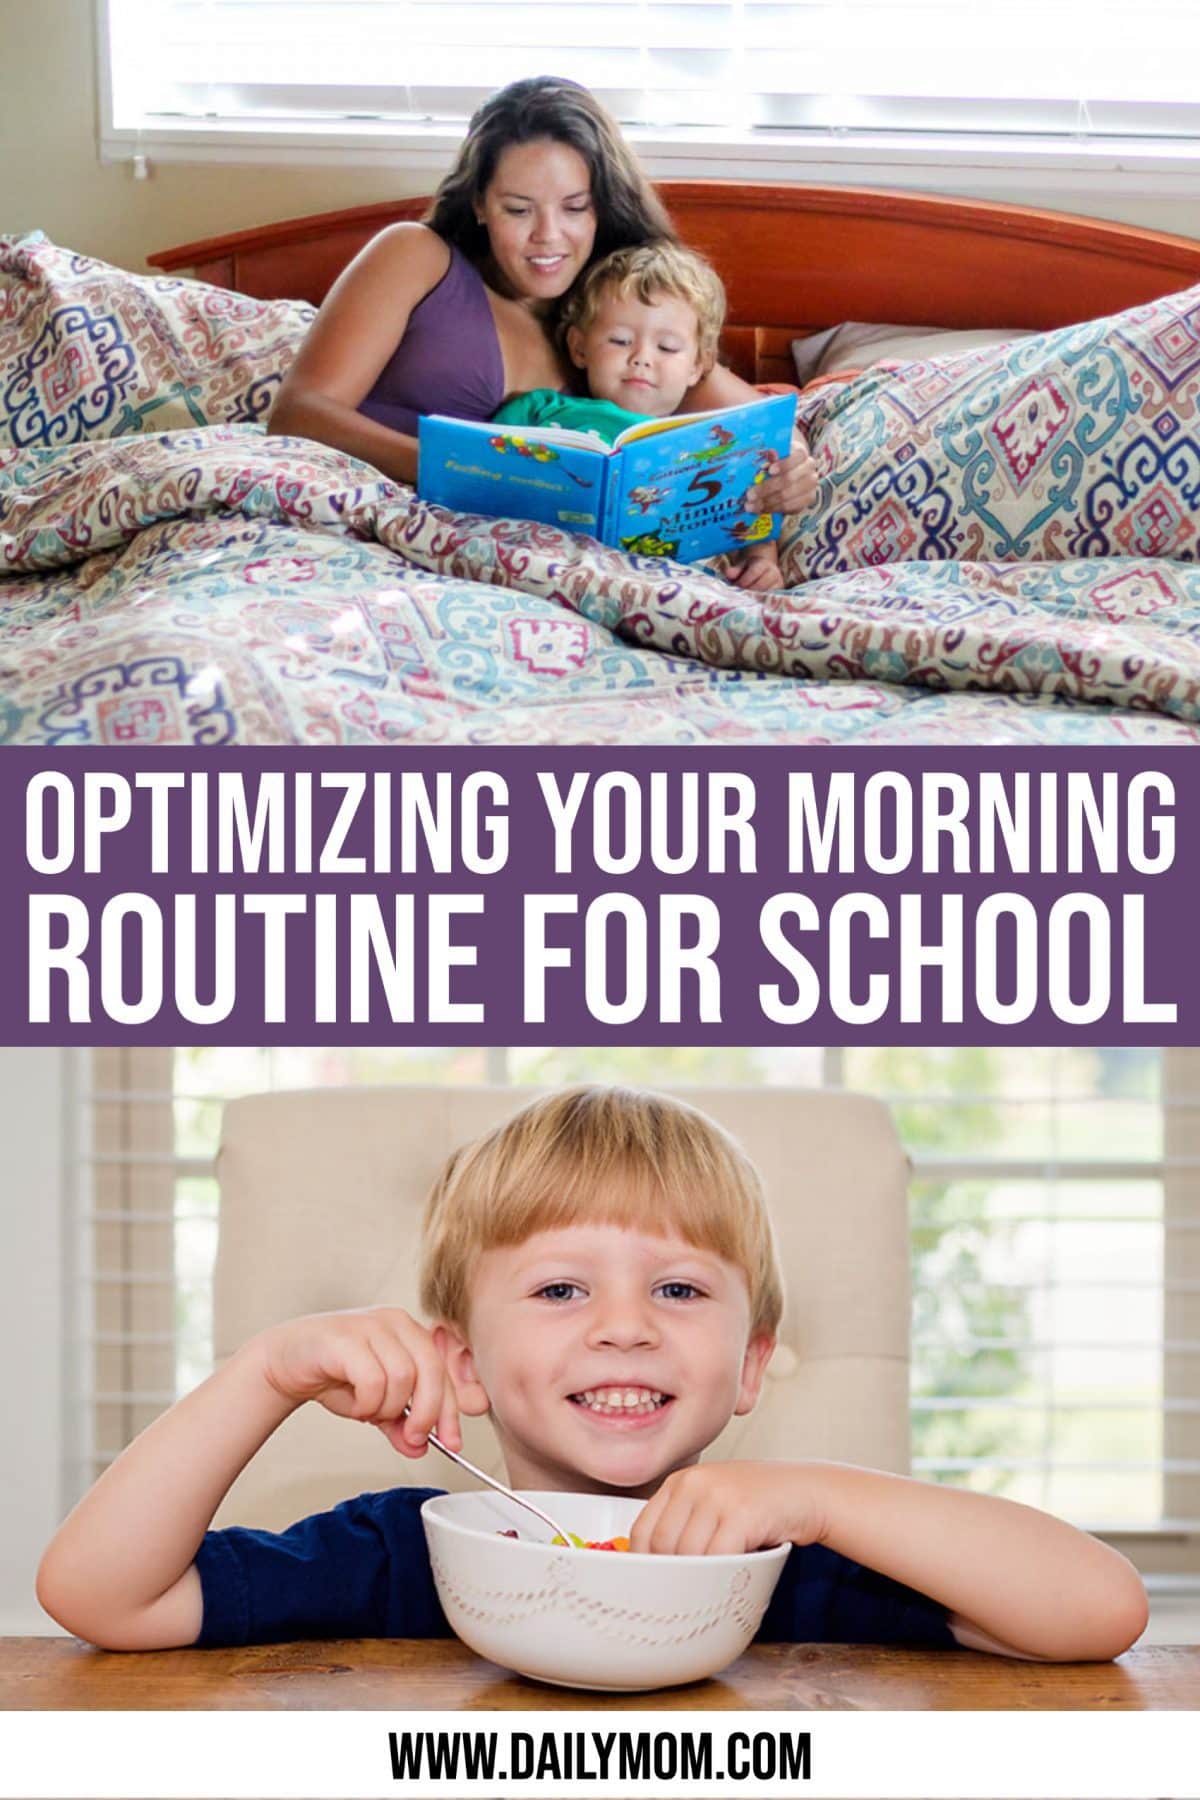 Optimize Your Morning Routine For School